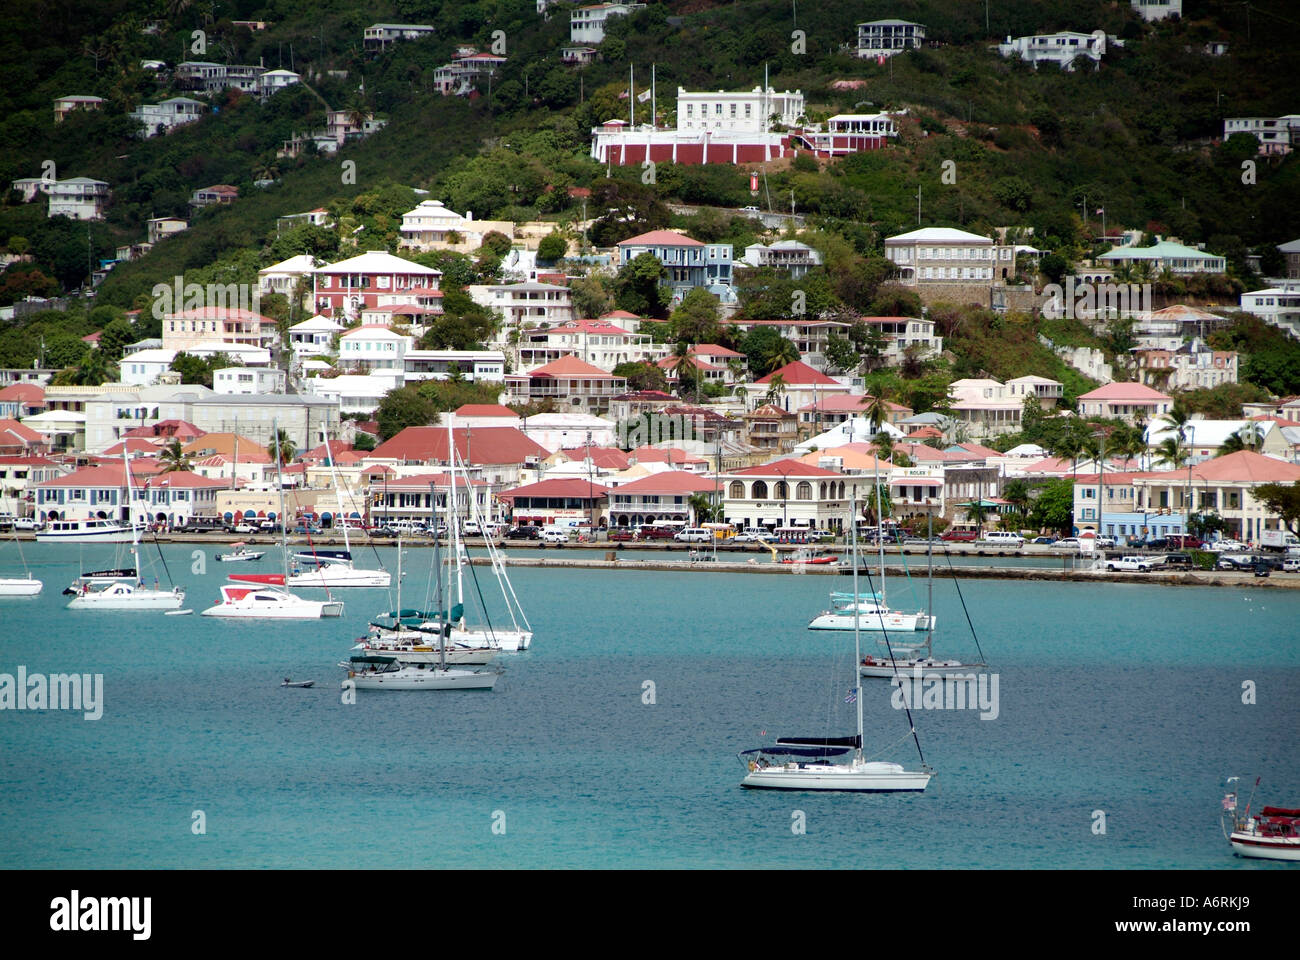 The cruise ship Carnival Fantasy from Port Canaveral visits the Caribbean Island of St Thomas Stock Photo